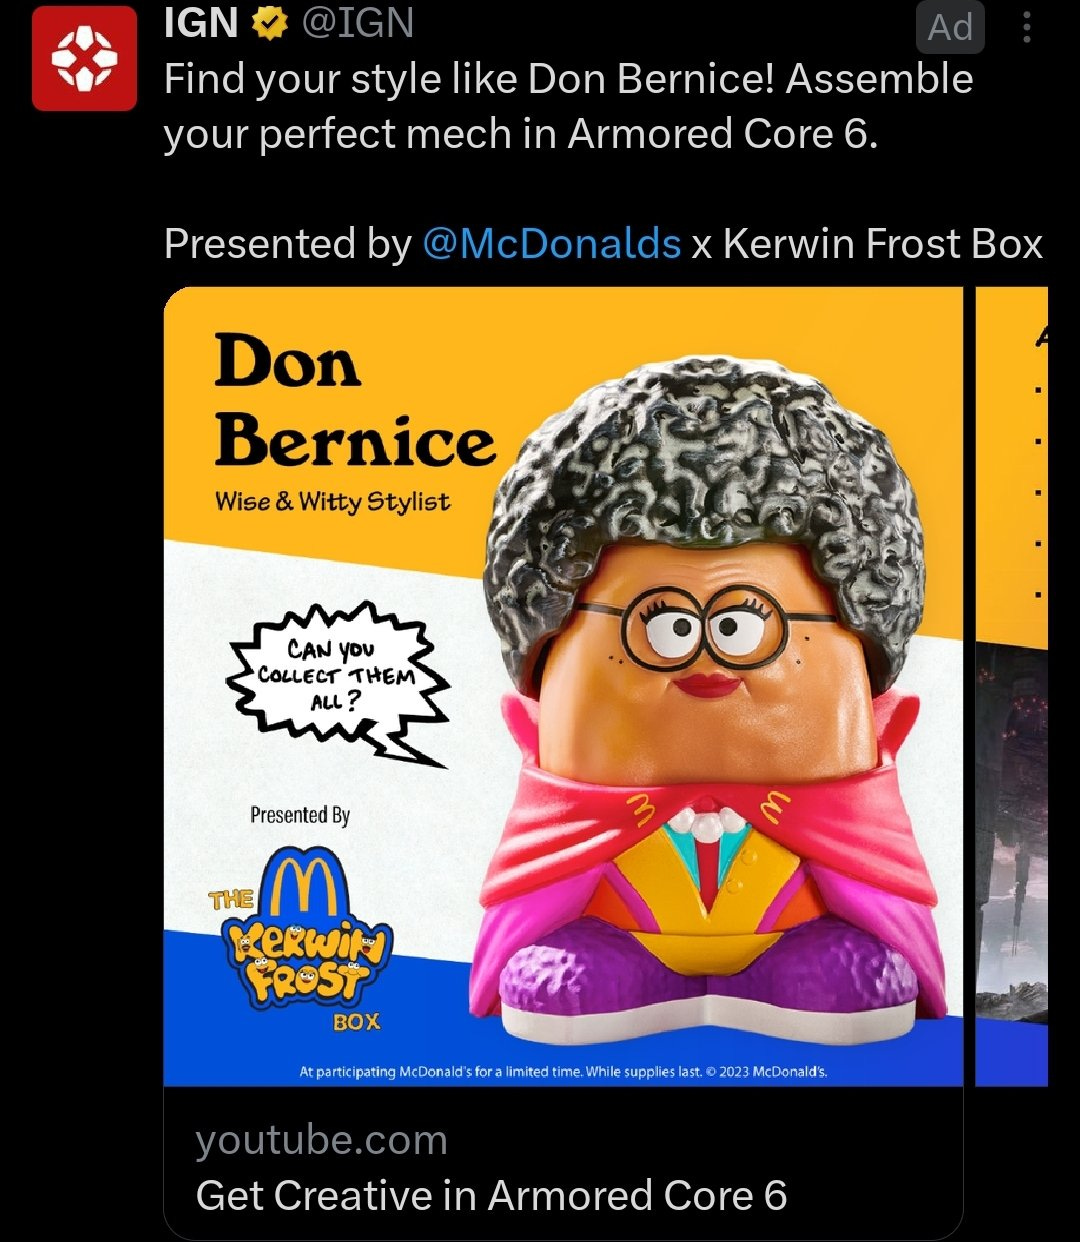 A Twitter ad from IGN reading "Find your style like Don Bernice! Assemble your perfect mech in Armored Core 6. Presented by McDonald's x Kerwin Frost Box" and then a YouTube thumbnail for a video titled "Get Creative in Armored Core 6" but the thumbnail is a McNugget toy in a costume from the McDonald's x Kerwin Frost box and it says Don Bernice - Wise and Witty Stylist and as far as I can tell that's not even like a real person or anything? Am I supposed to know who any of these people are? Hello? I'm cold and scared